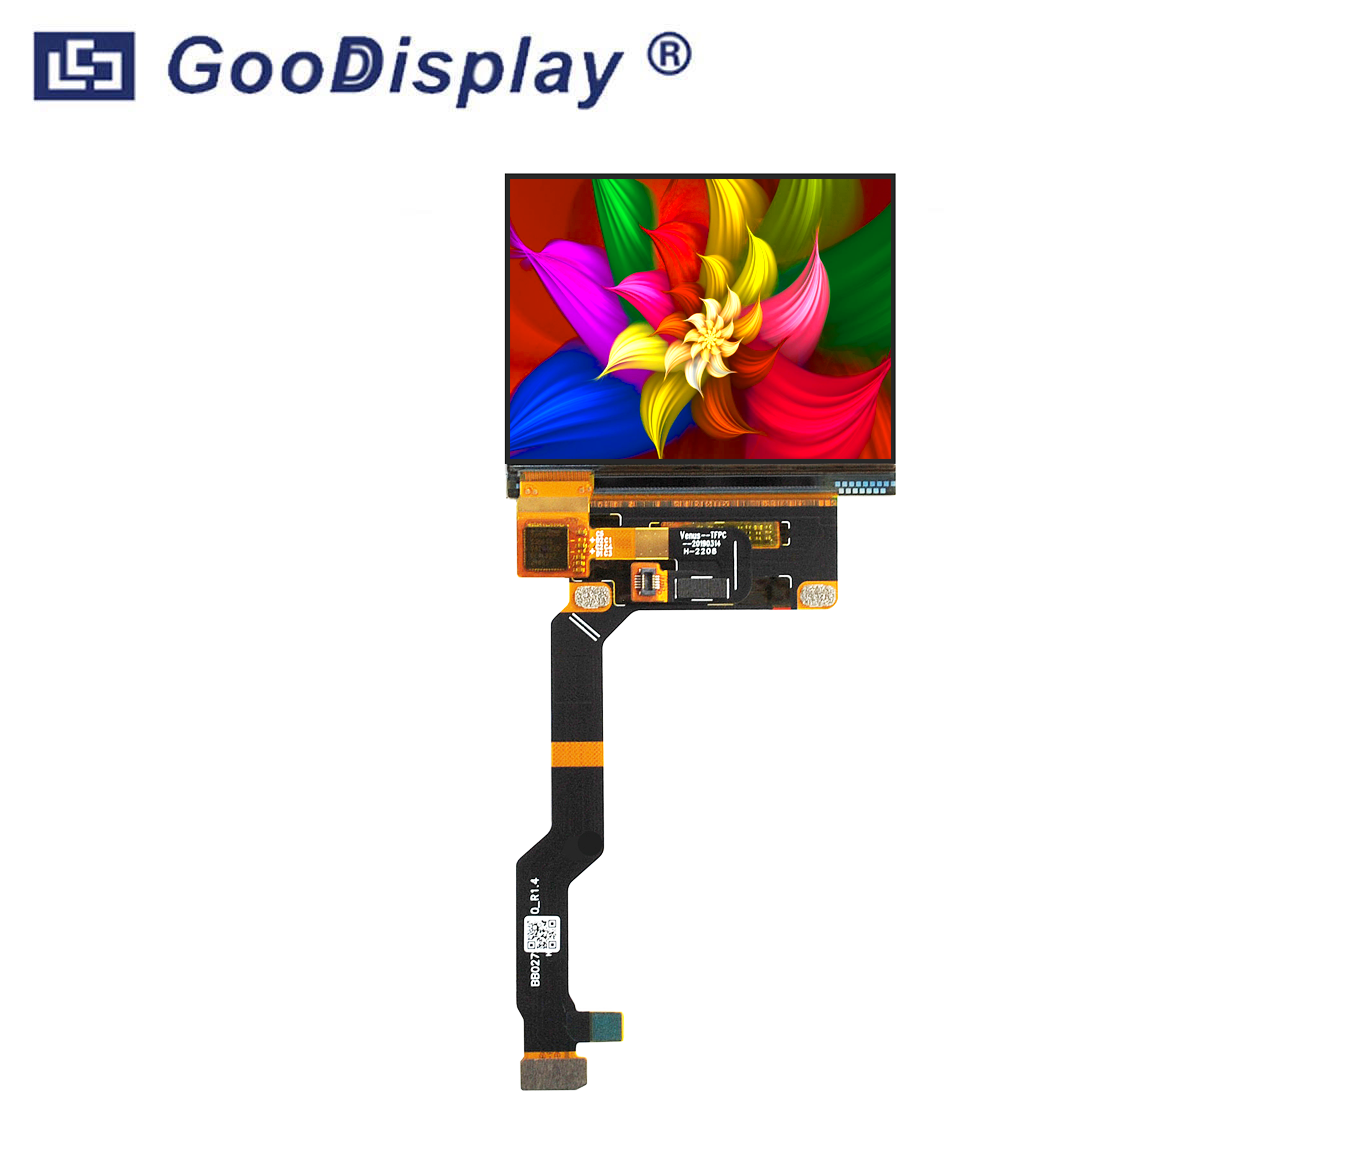 2.69 inch full color AM OLED with touch panel, 800x600: GDOJ026C01